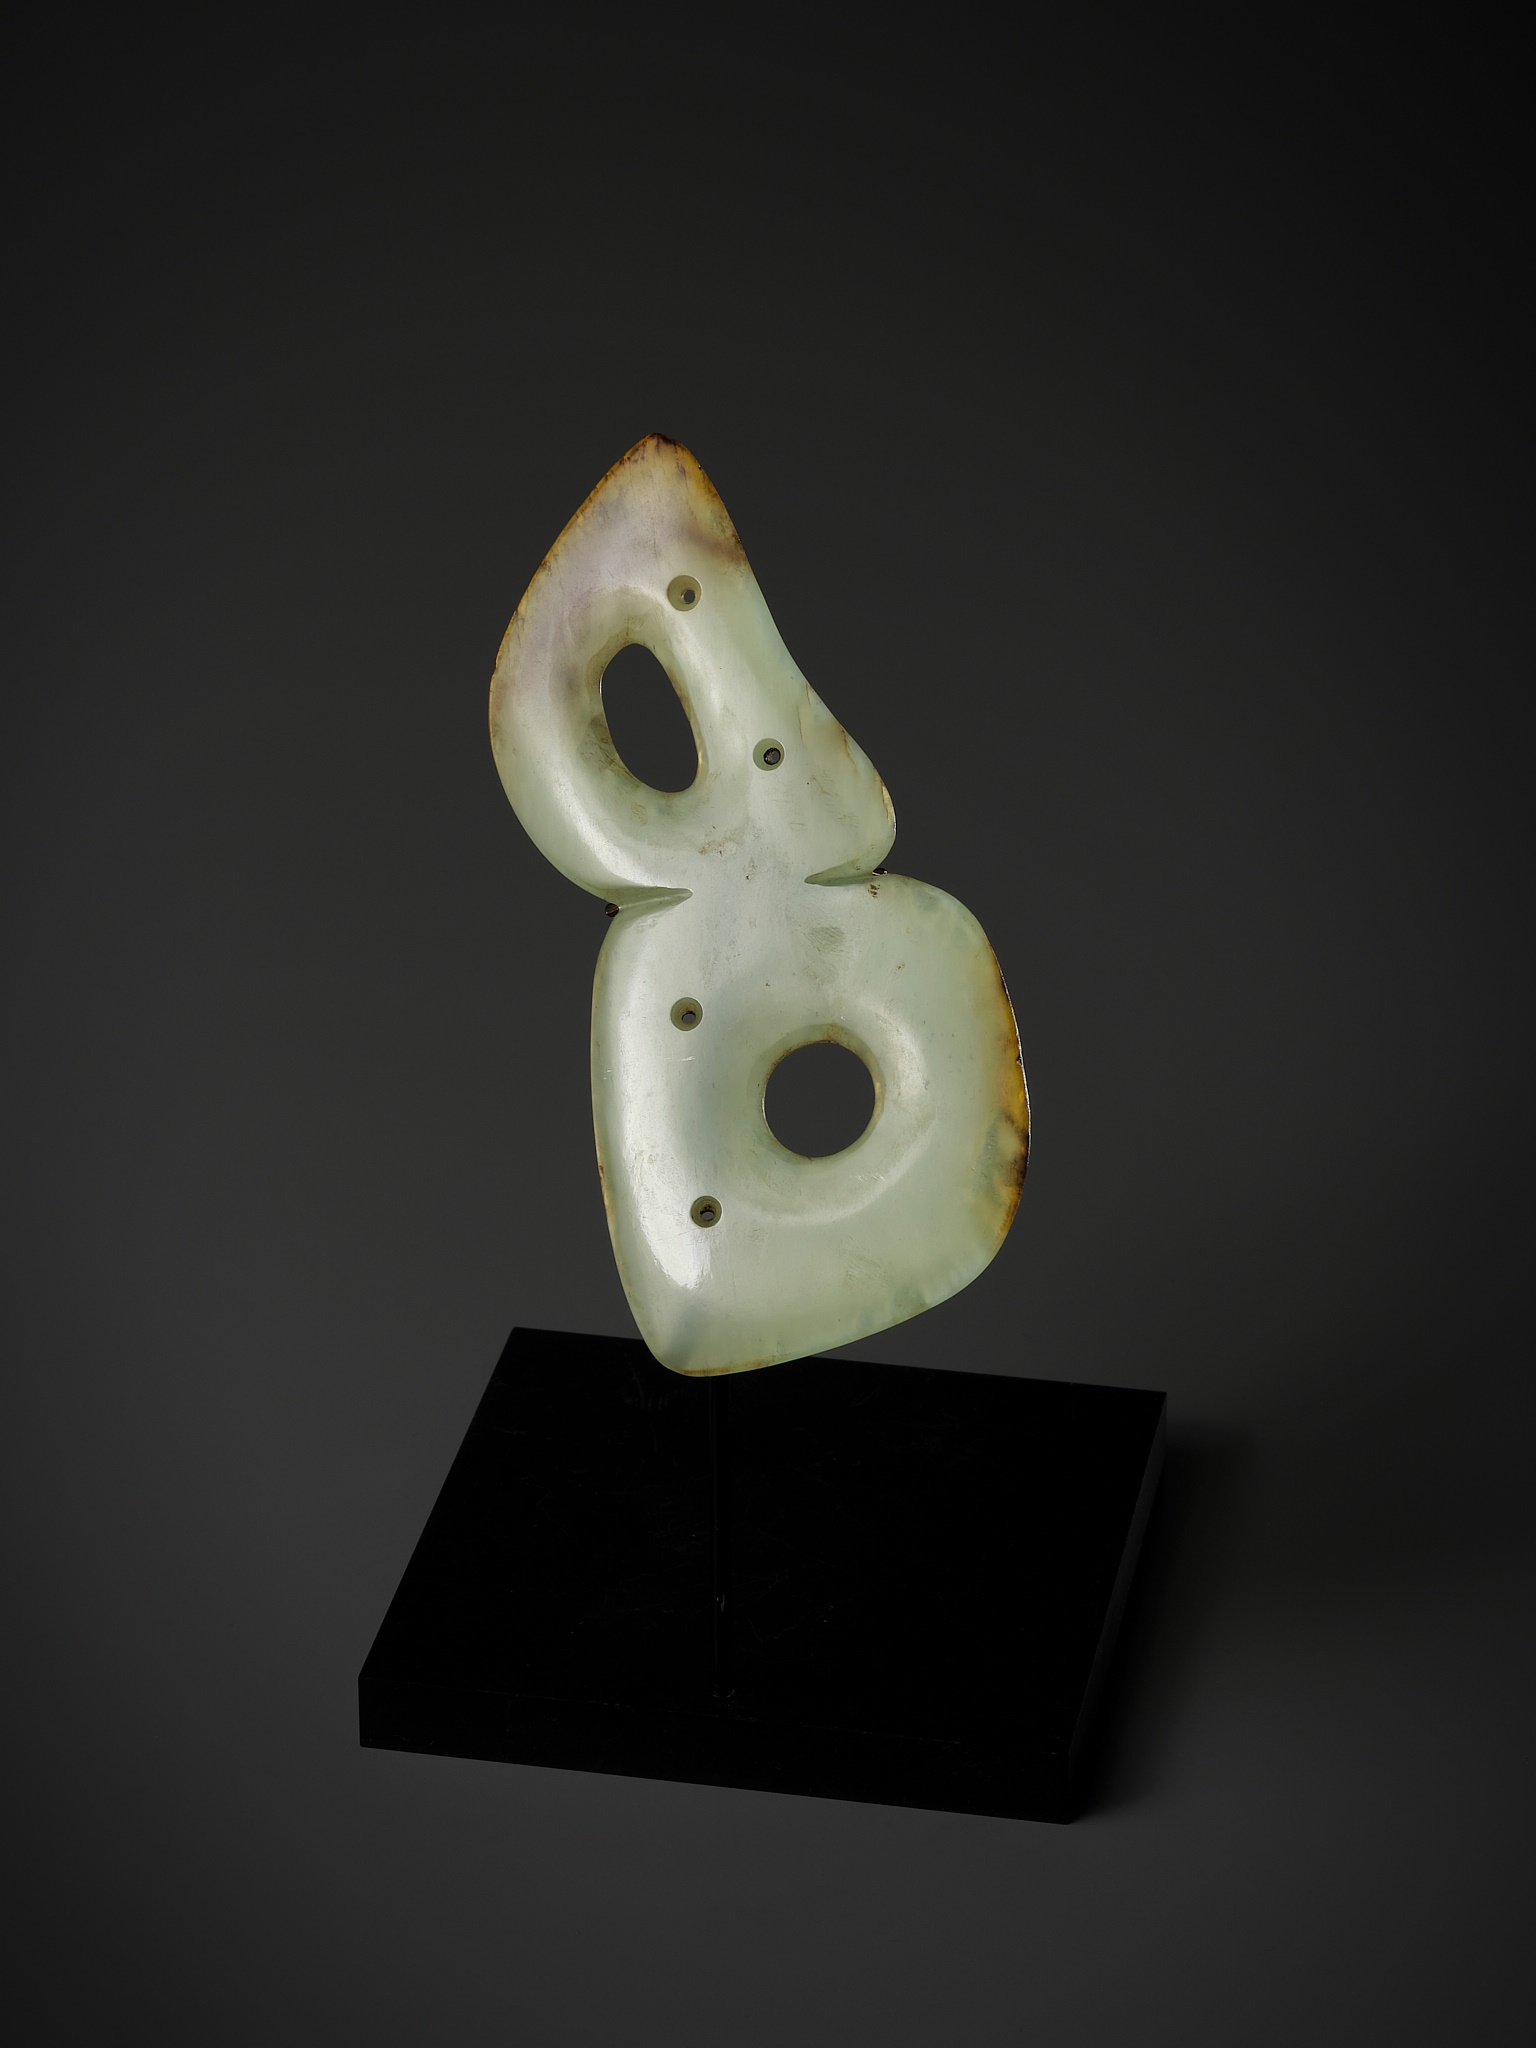 A PALE YELLOW JADE DOUBLE-HOLE ORNAMENT PLAQUE, HONGSHAN CULTURE - Image 12 of 14